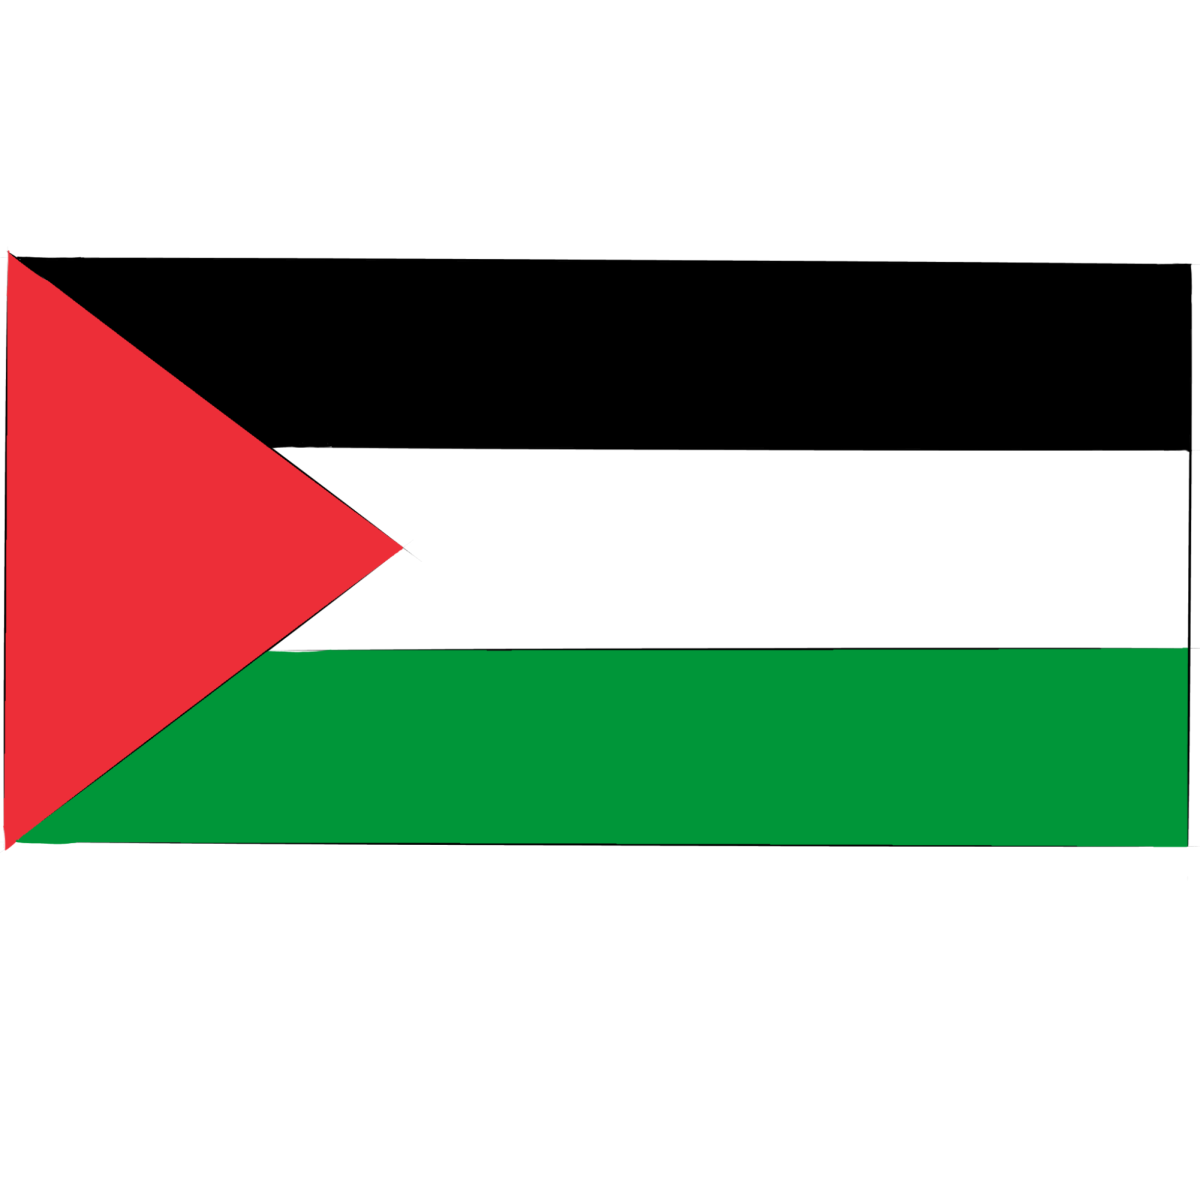 Sophomore Shares View on Tragedy in Palestine